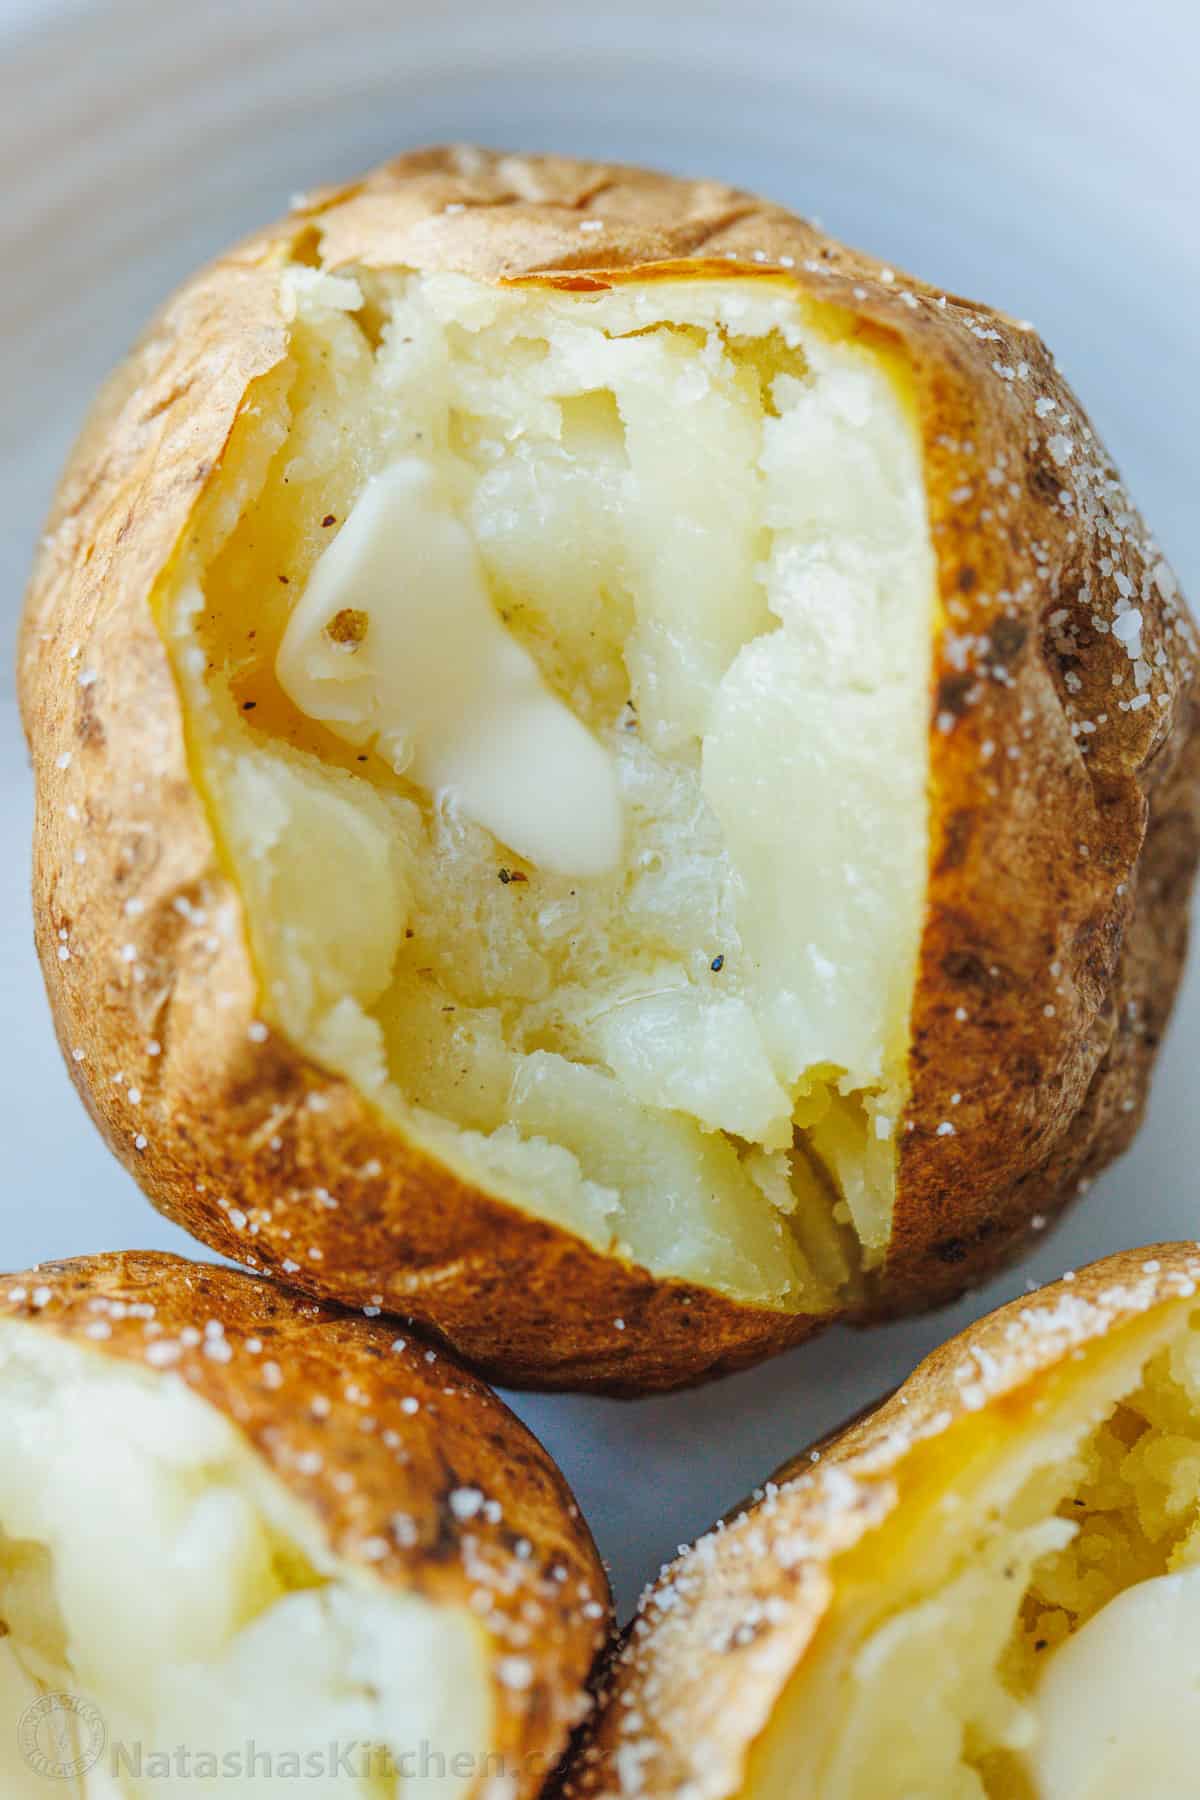 A baked potato sliced open to reveal the fluffy insides.